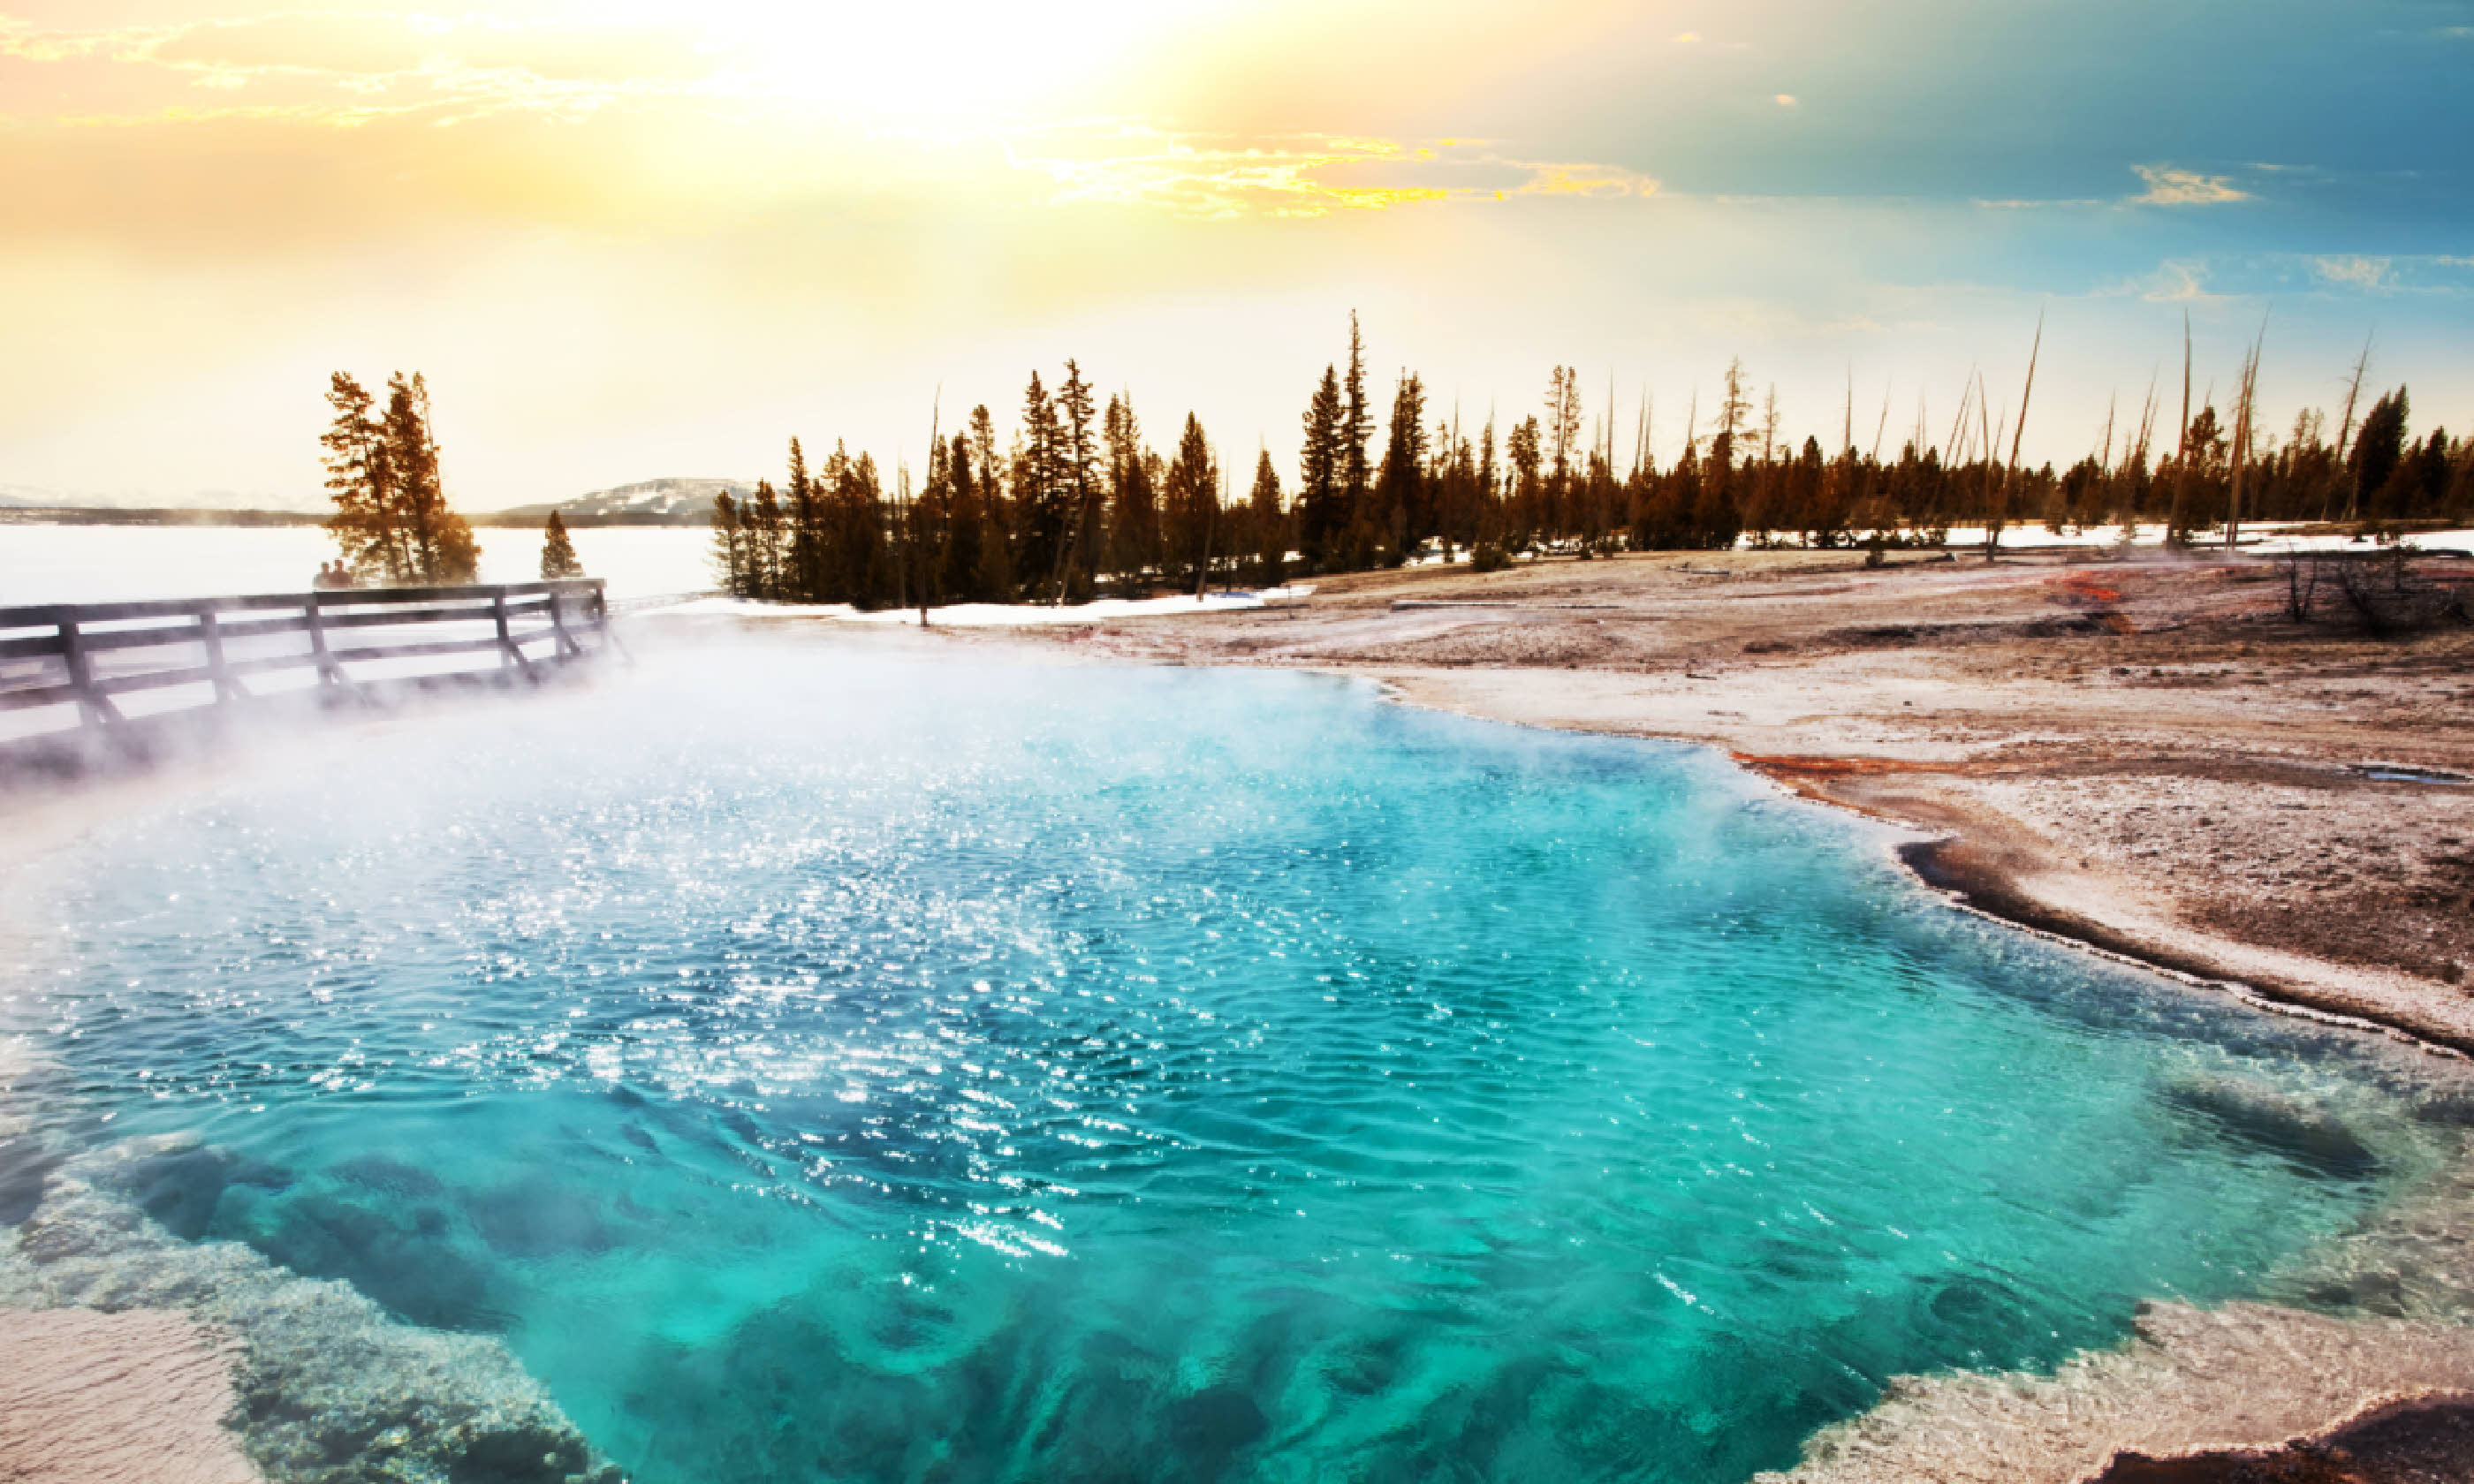 Hot springs in Yellowstone NP (Shutterstock: see credit below)